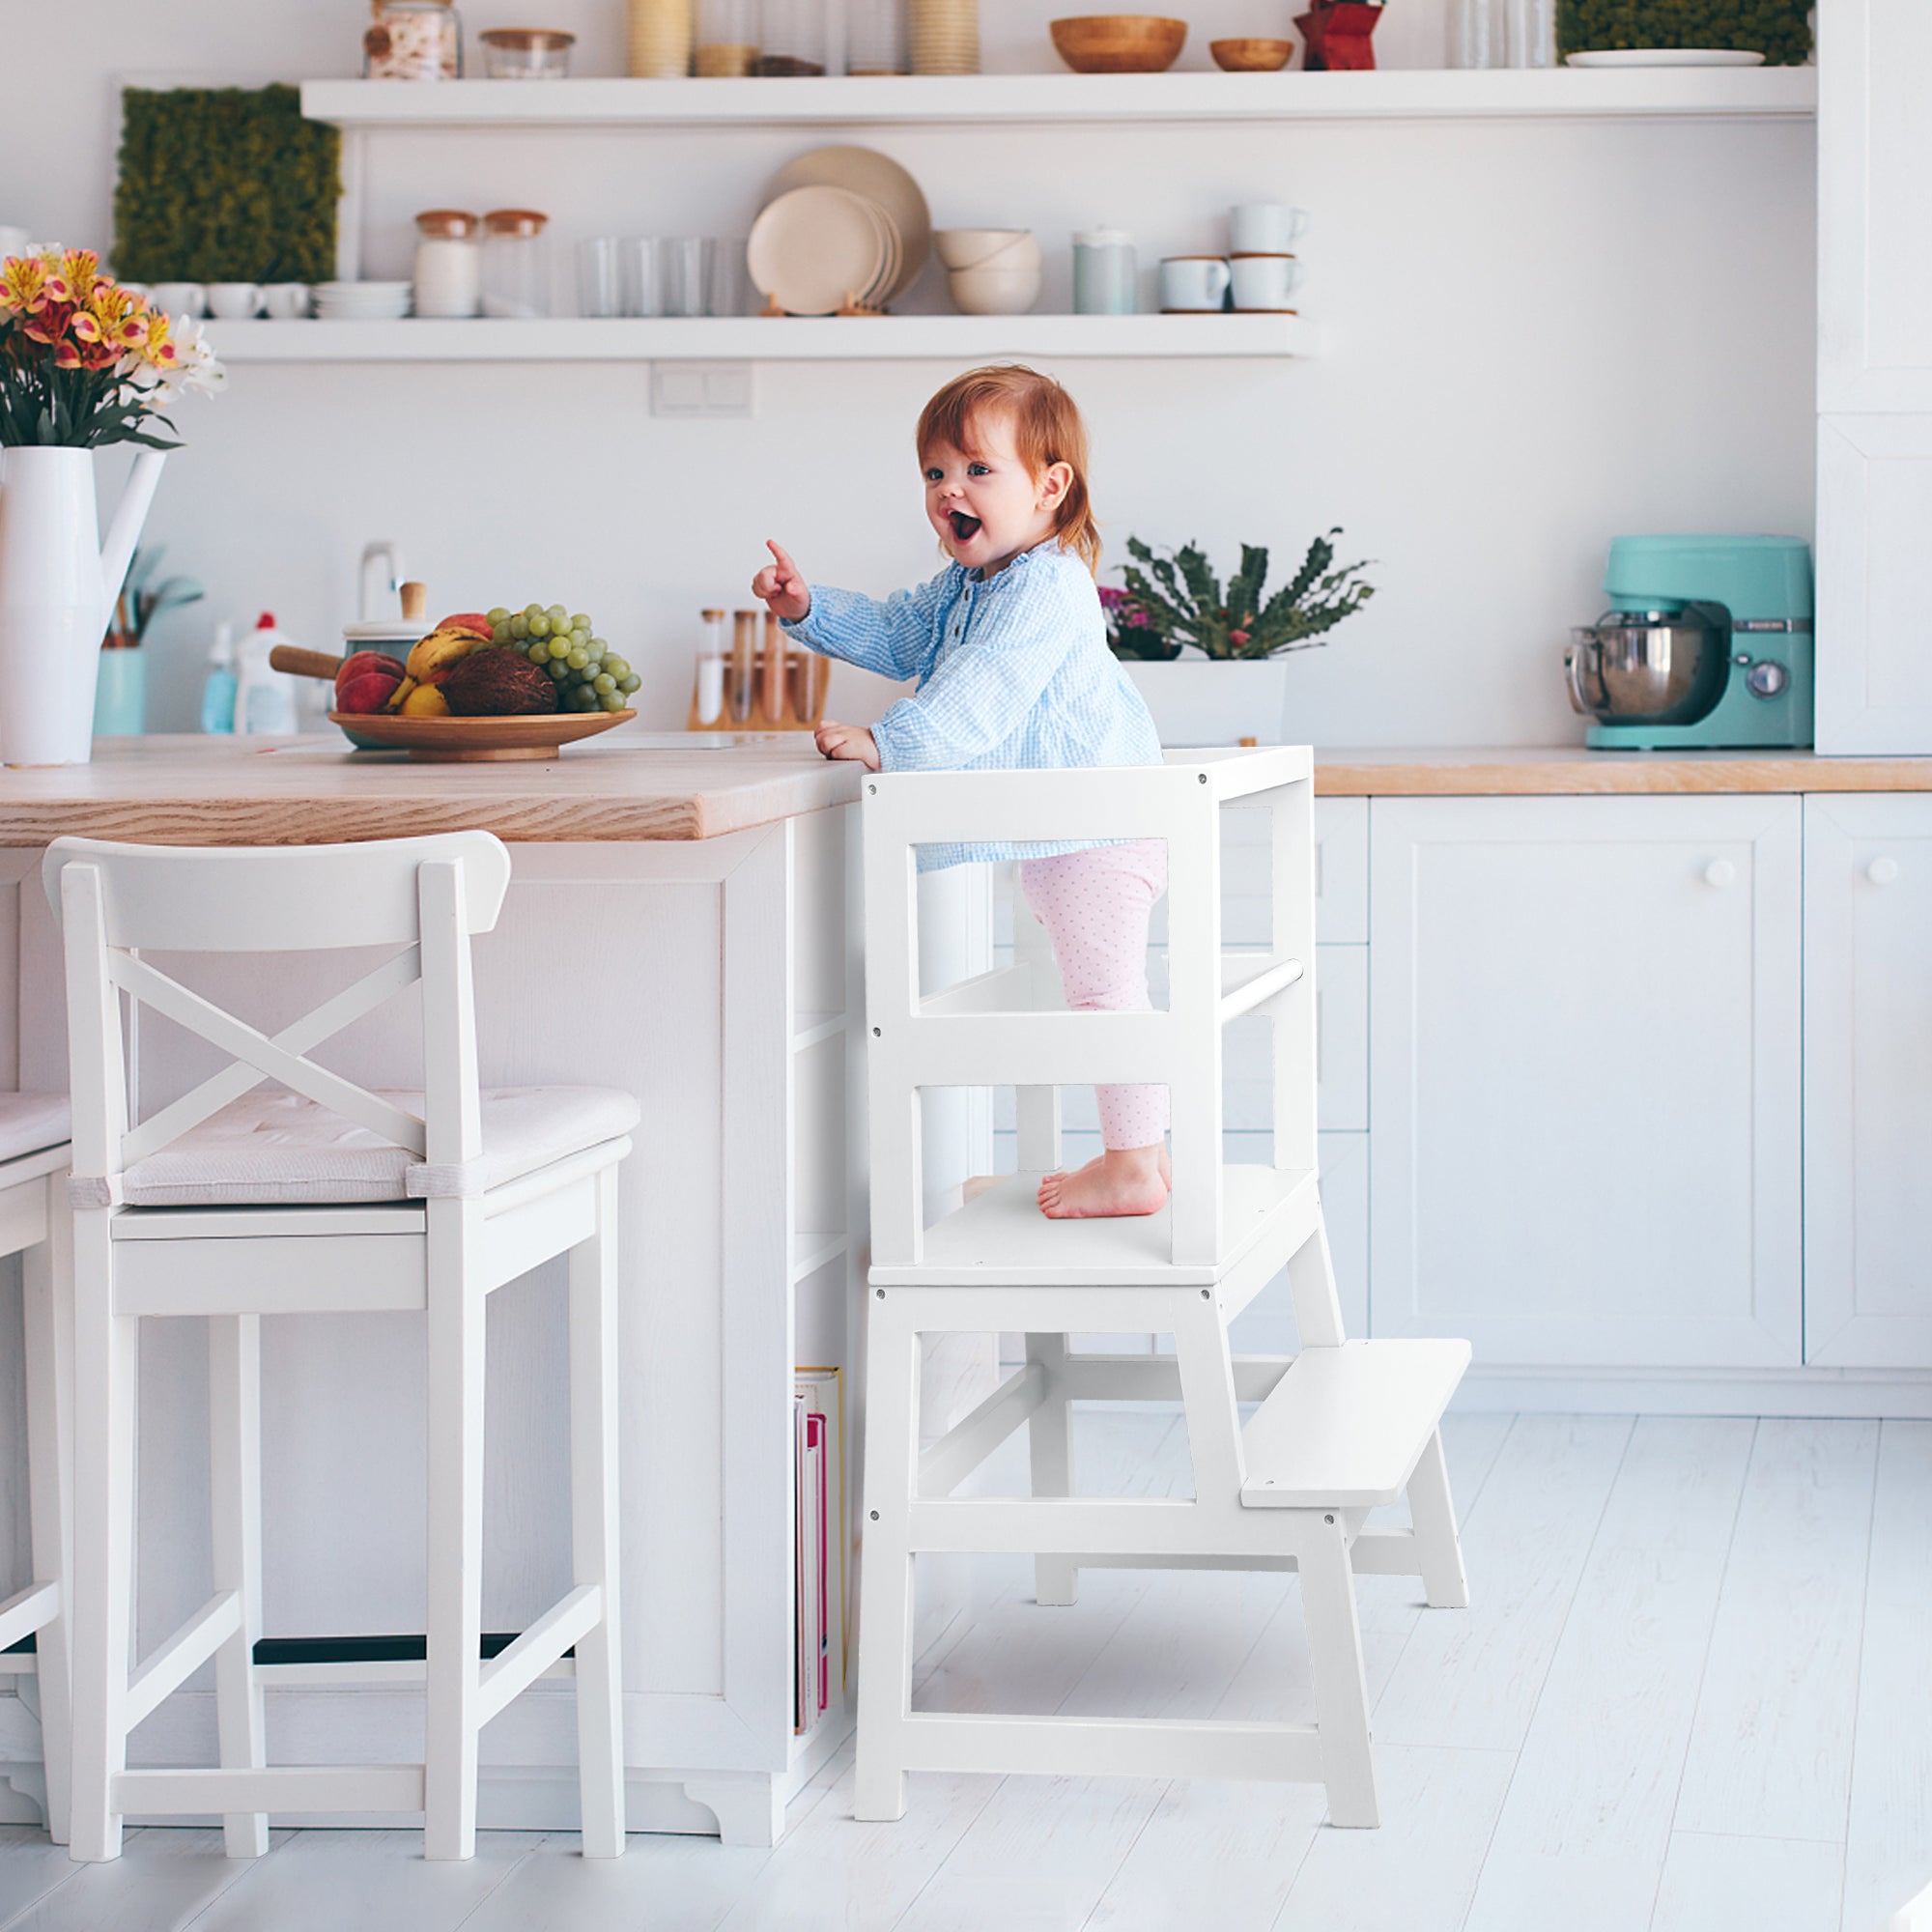 Is a learning tower worth it? Kitchen learning tower buying guides